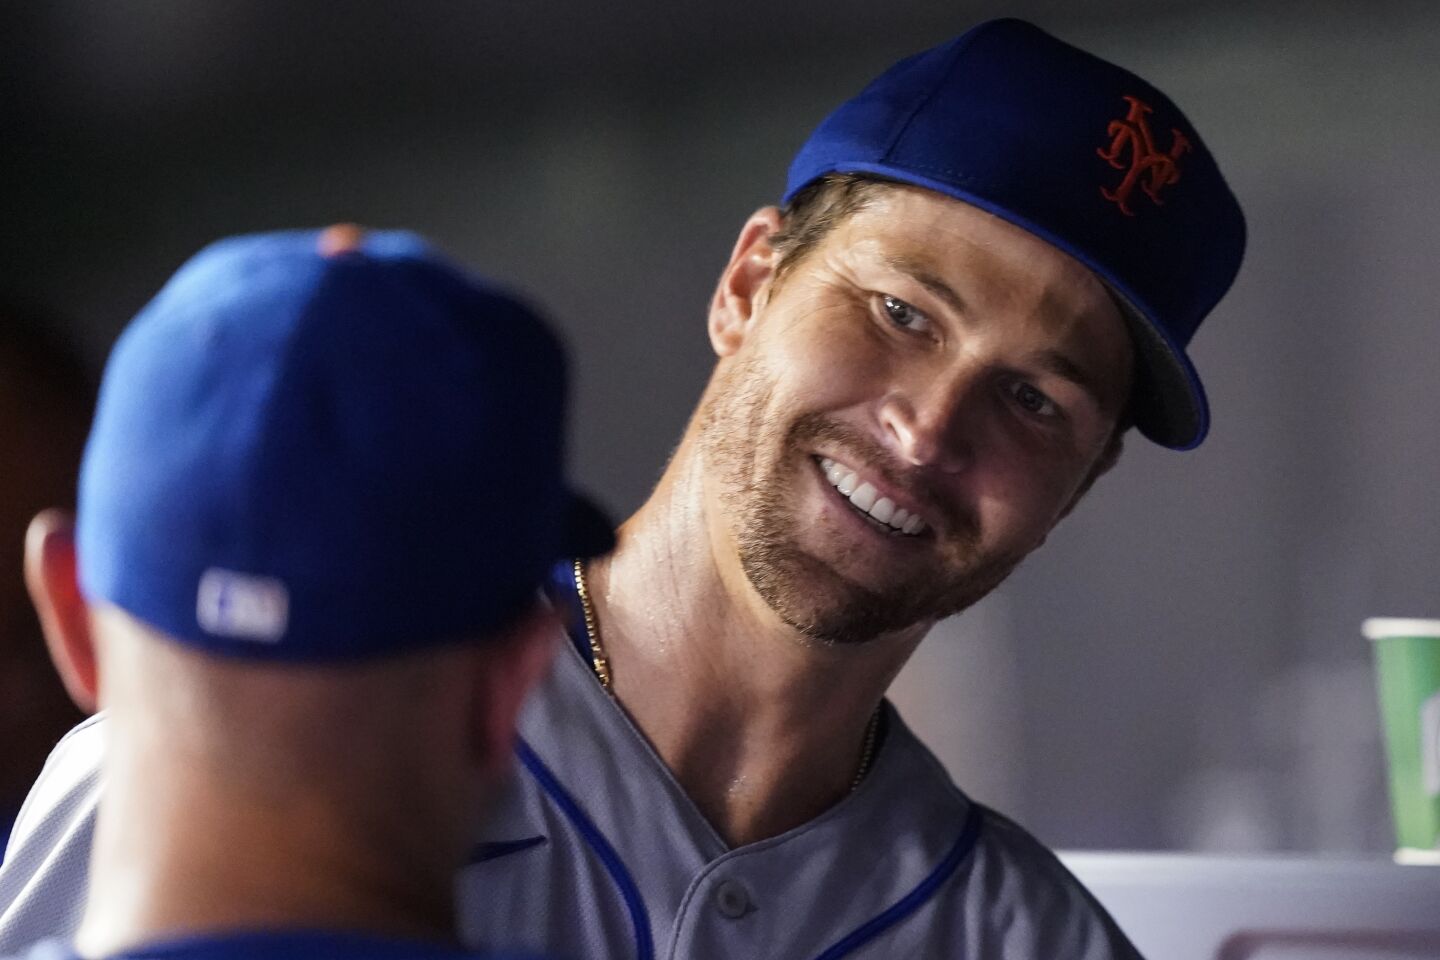 2 | New York Mets (70-39; LW: 4)The Mets clearly have acquired vintage Jacob deGrom, who has 18 strikeouts, one walk and a 2.53 ERA through his first two starts.